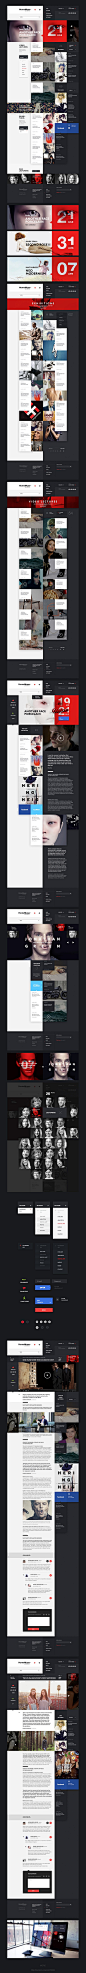 HomeMuse Gallery by Sergei Gurov clean and russian = a deadly combo #webdesign